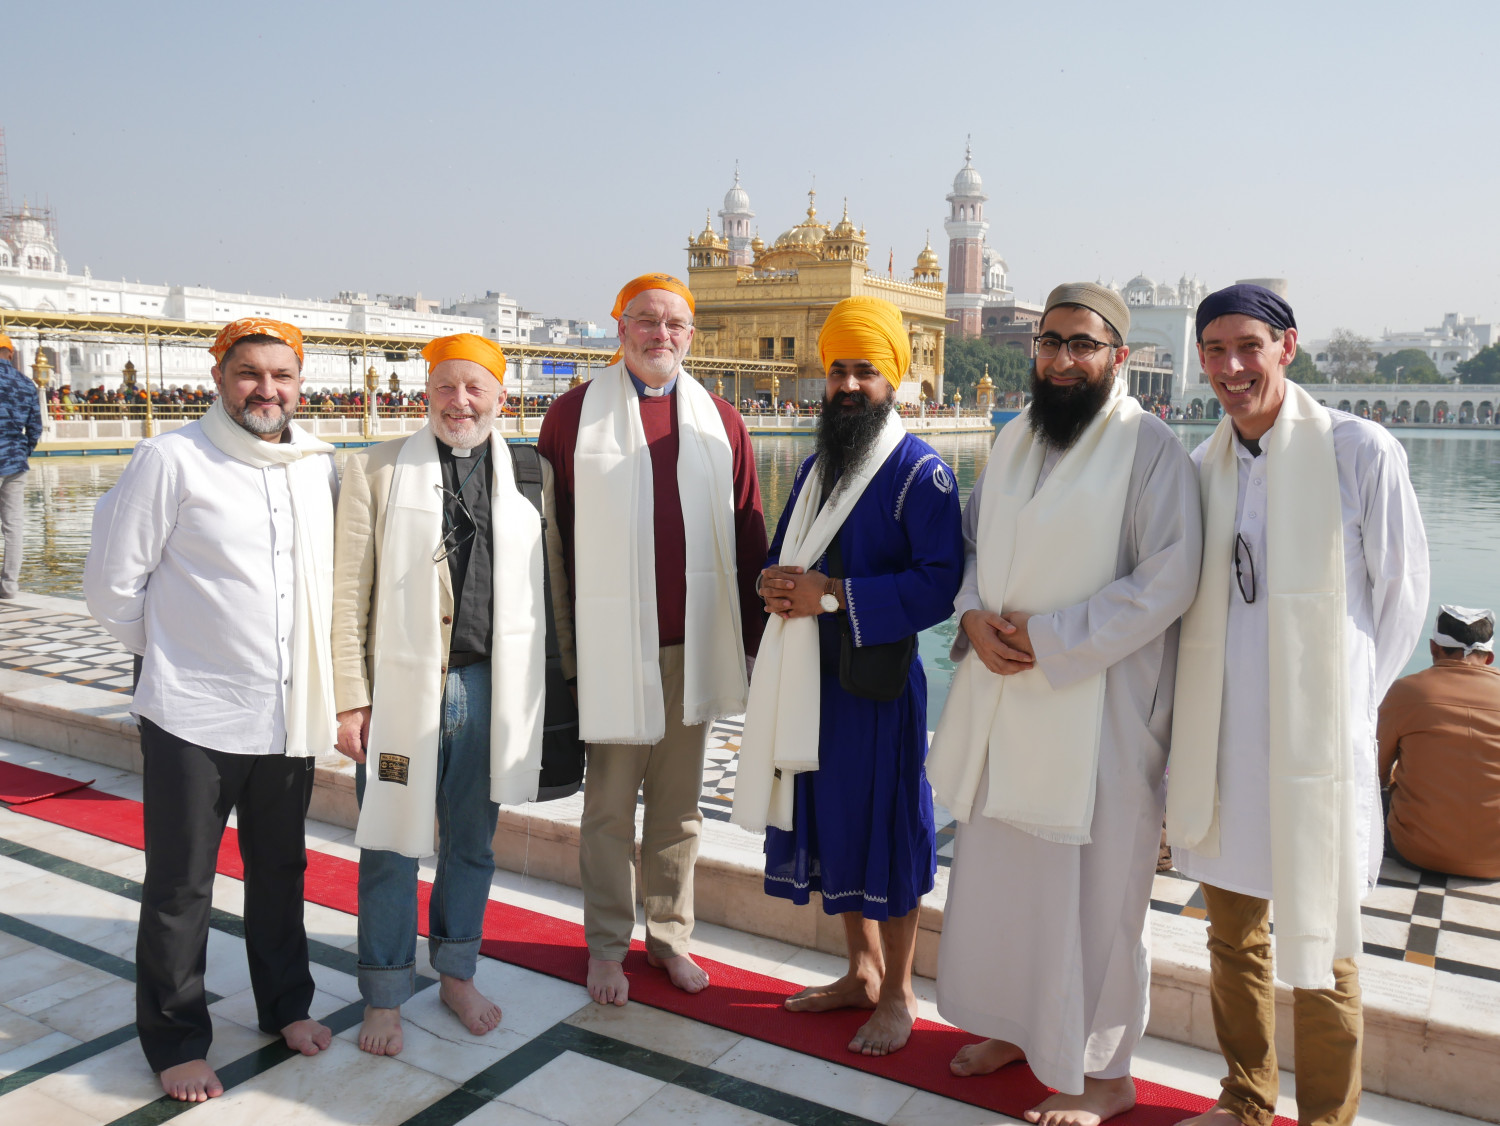 A group of men of different faiths at the Golden Temple in Amritsar